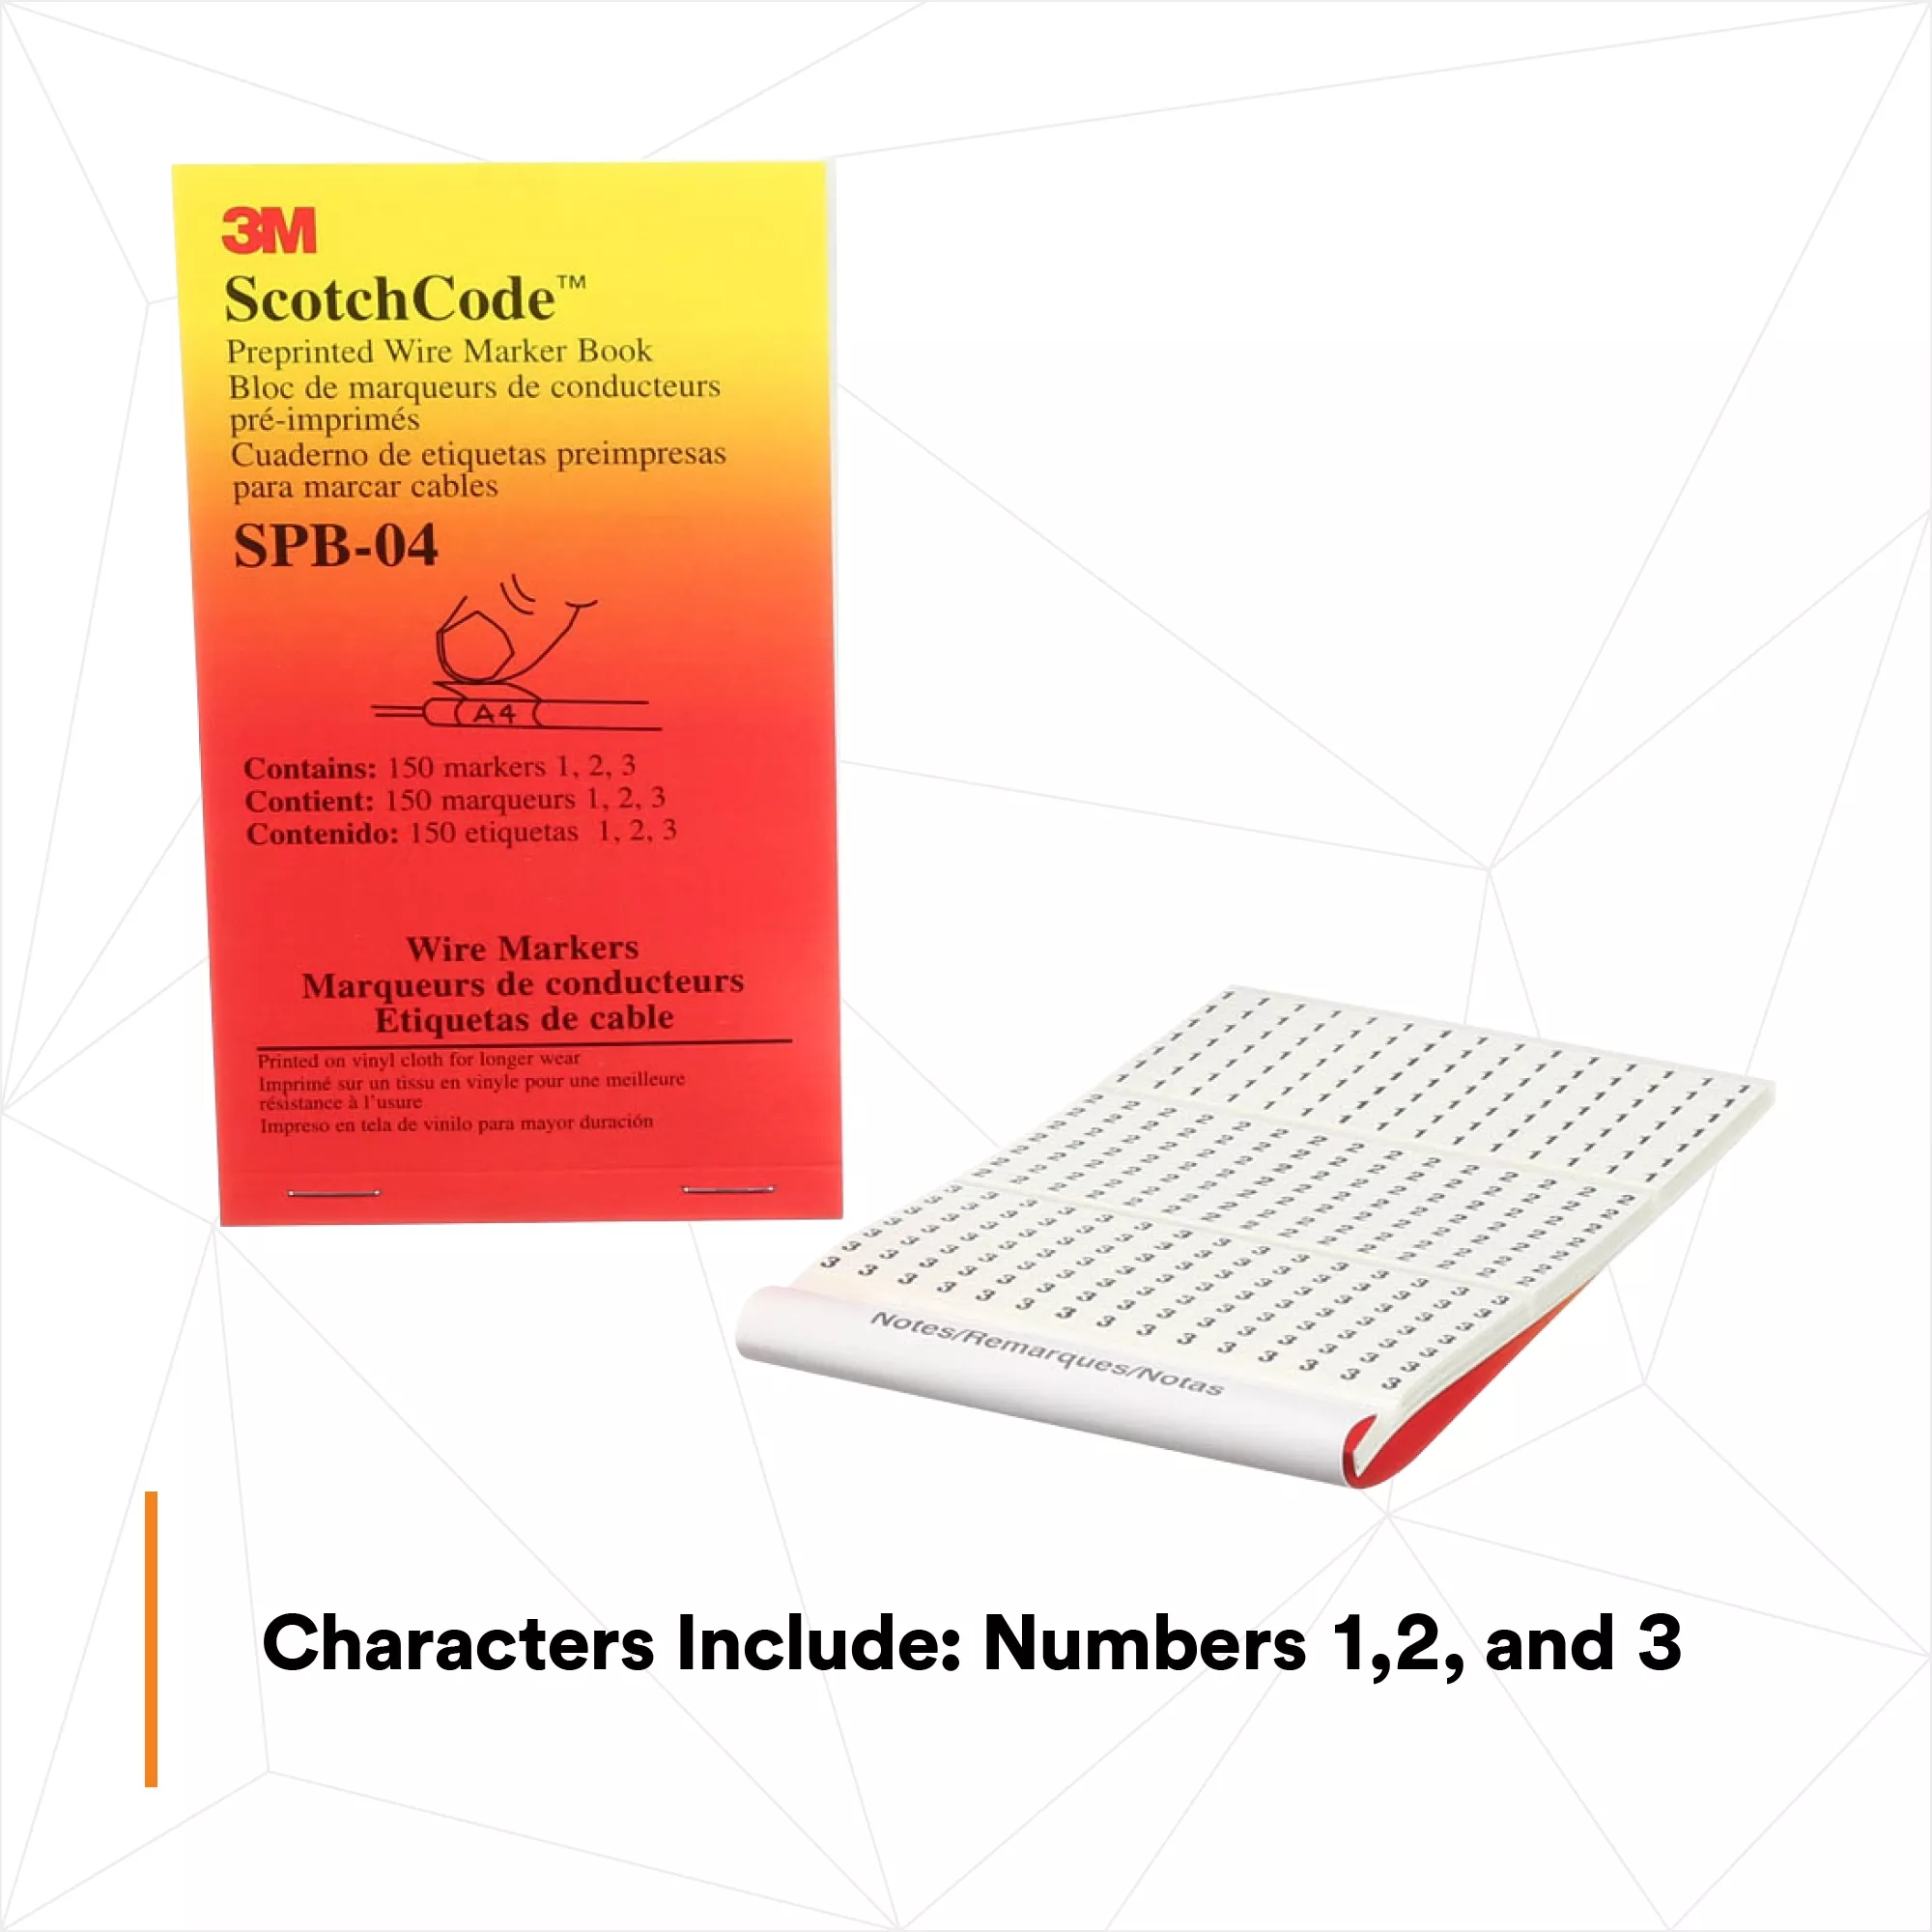 Product Number SPB-04 | 3M™ ScotchCode™ Pre-Printed Wire Marker Book SPB-04